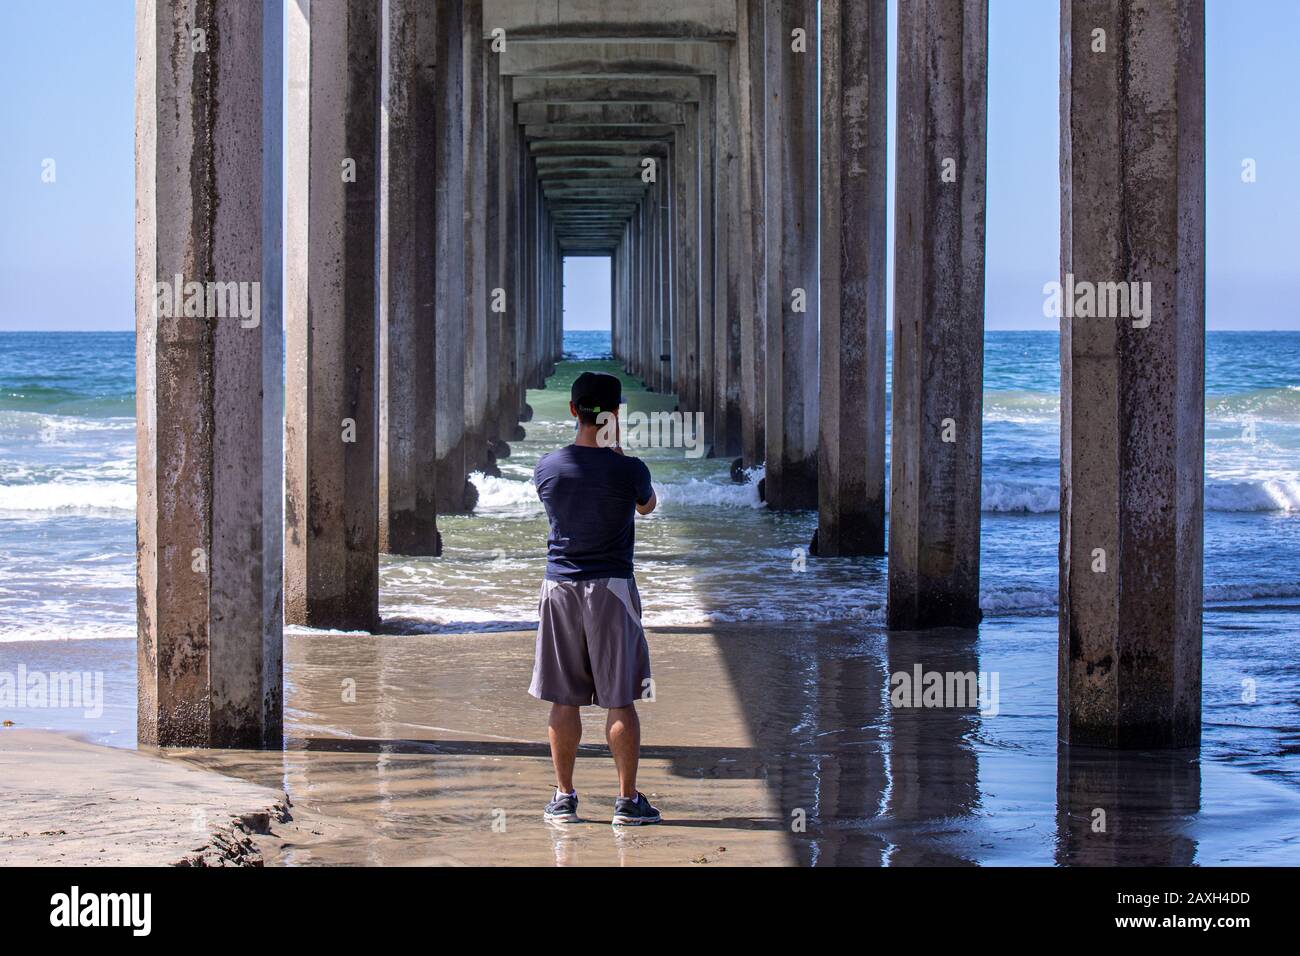 A young man taking pictures of the ocean from under the concrete pier, San Diego, California Stock Photo